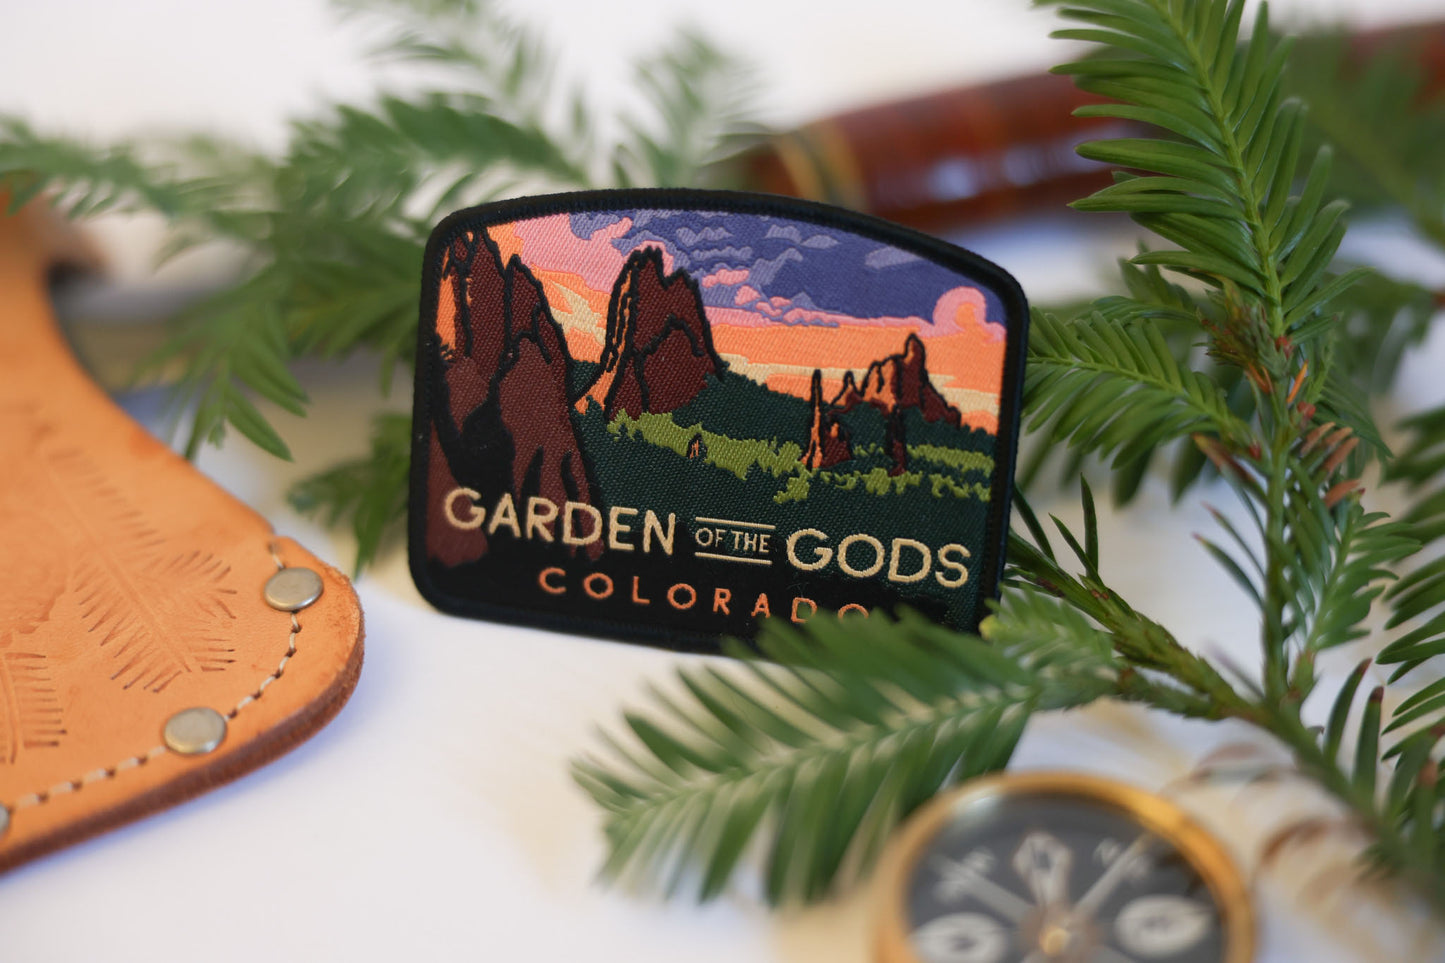 Garden of Gods Colorado Patch | Iron on Embroidered Patch